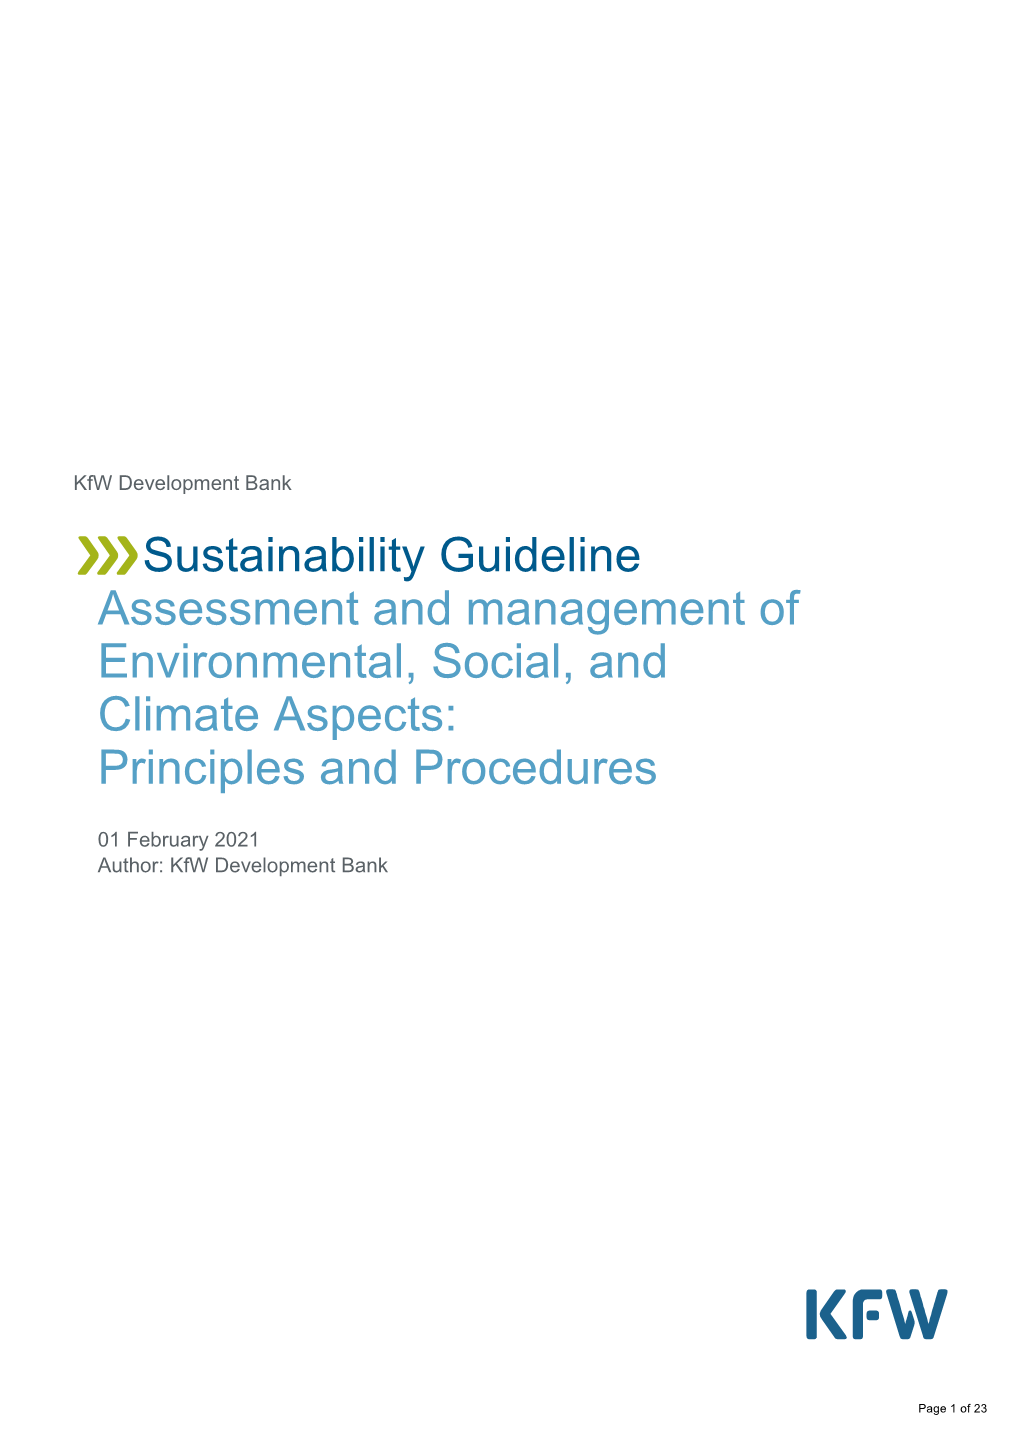 Sustainability Guideline Assessment and Management of Environmental, Social, and Climate Aspects: Principles and Procedures